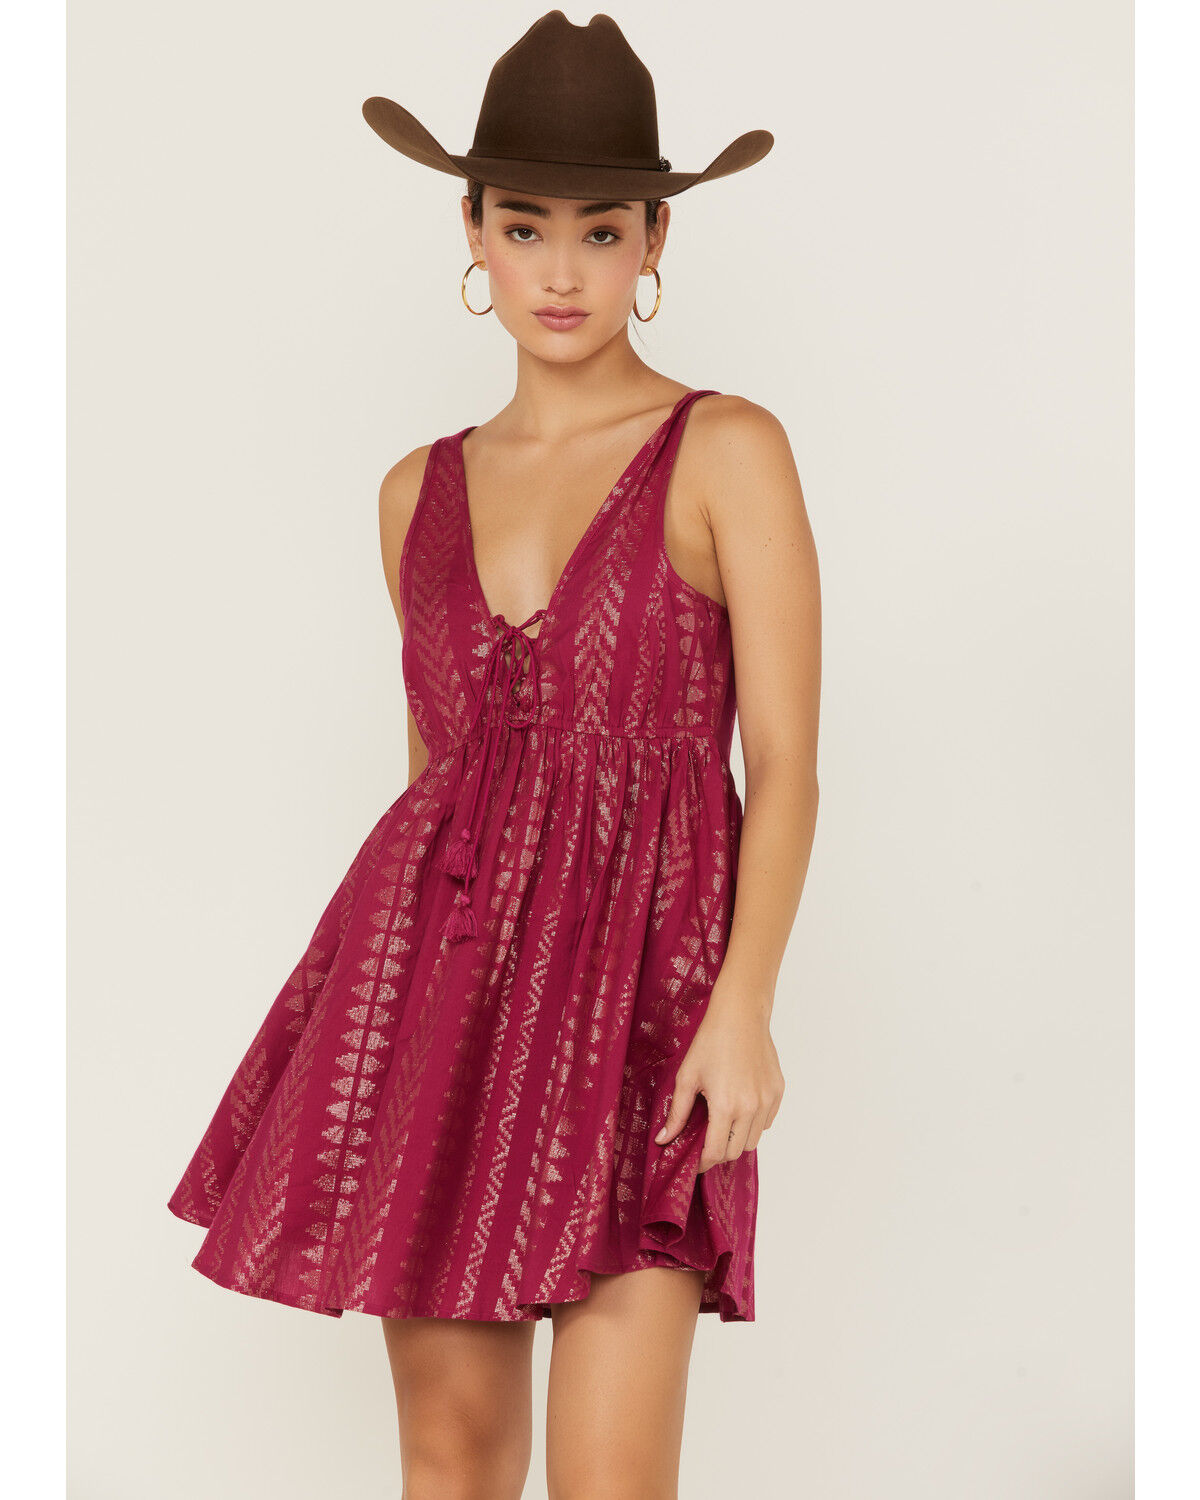 Women's Dresses - Country Outfitter